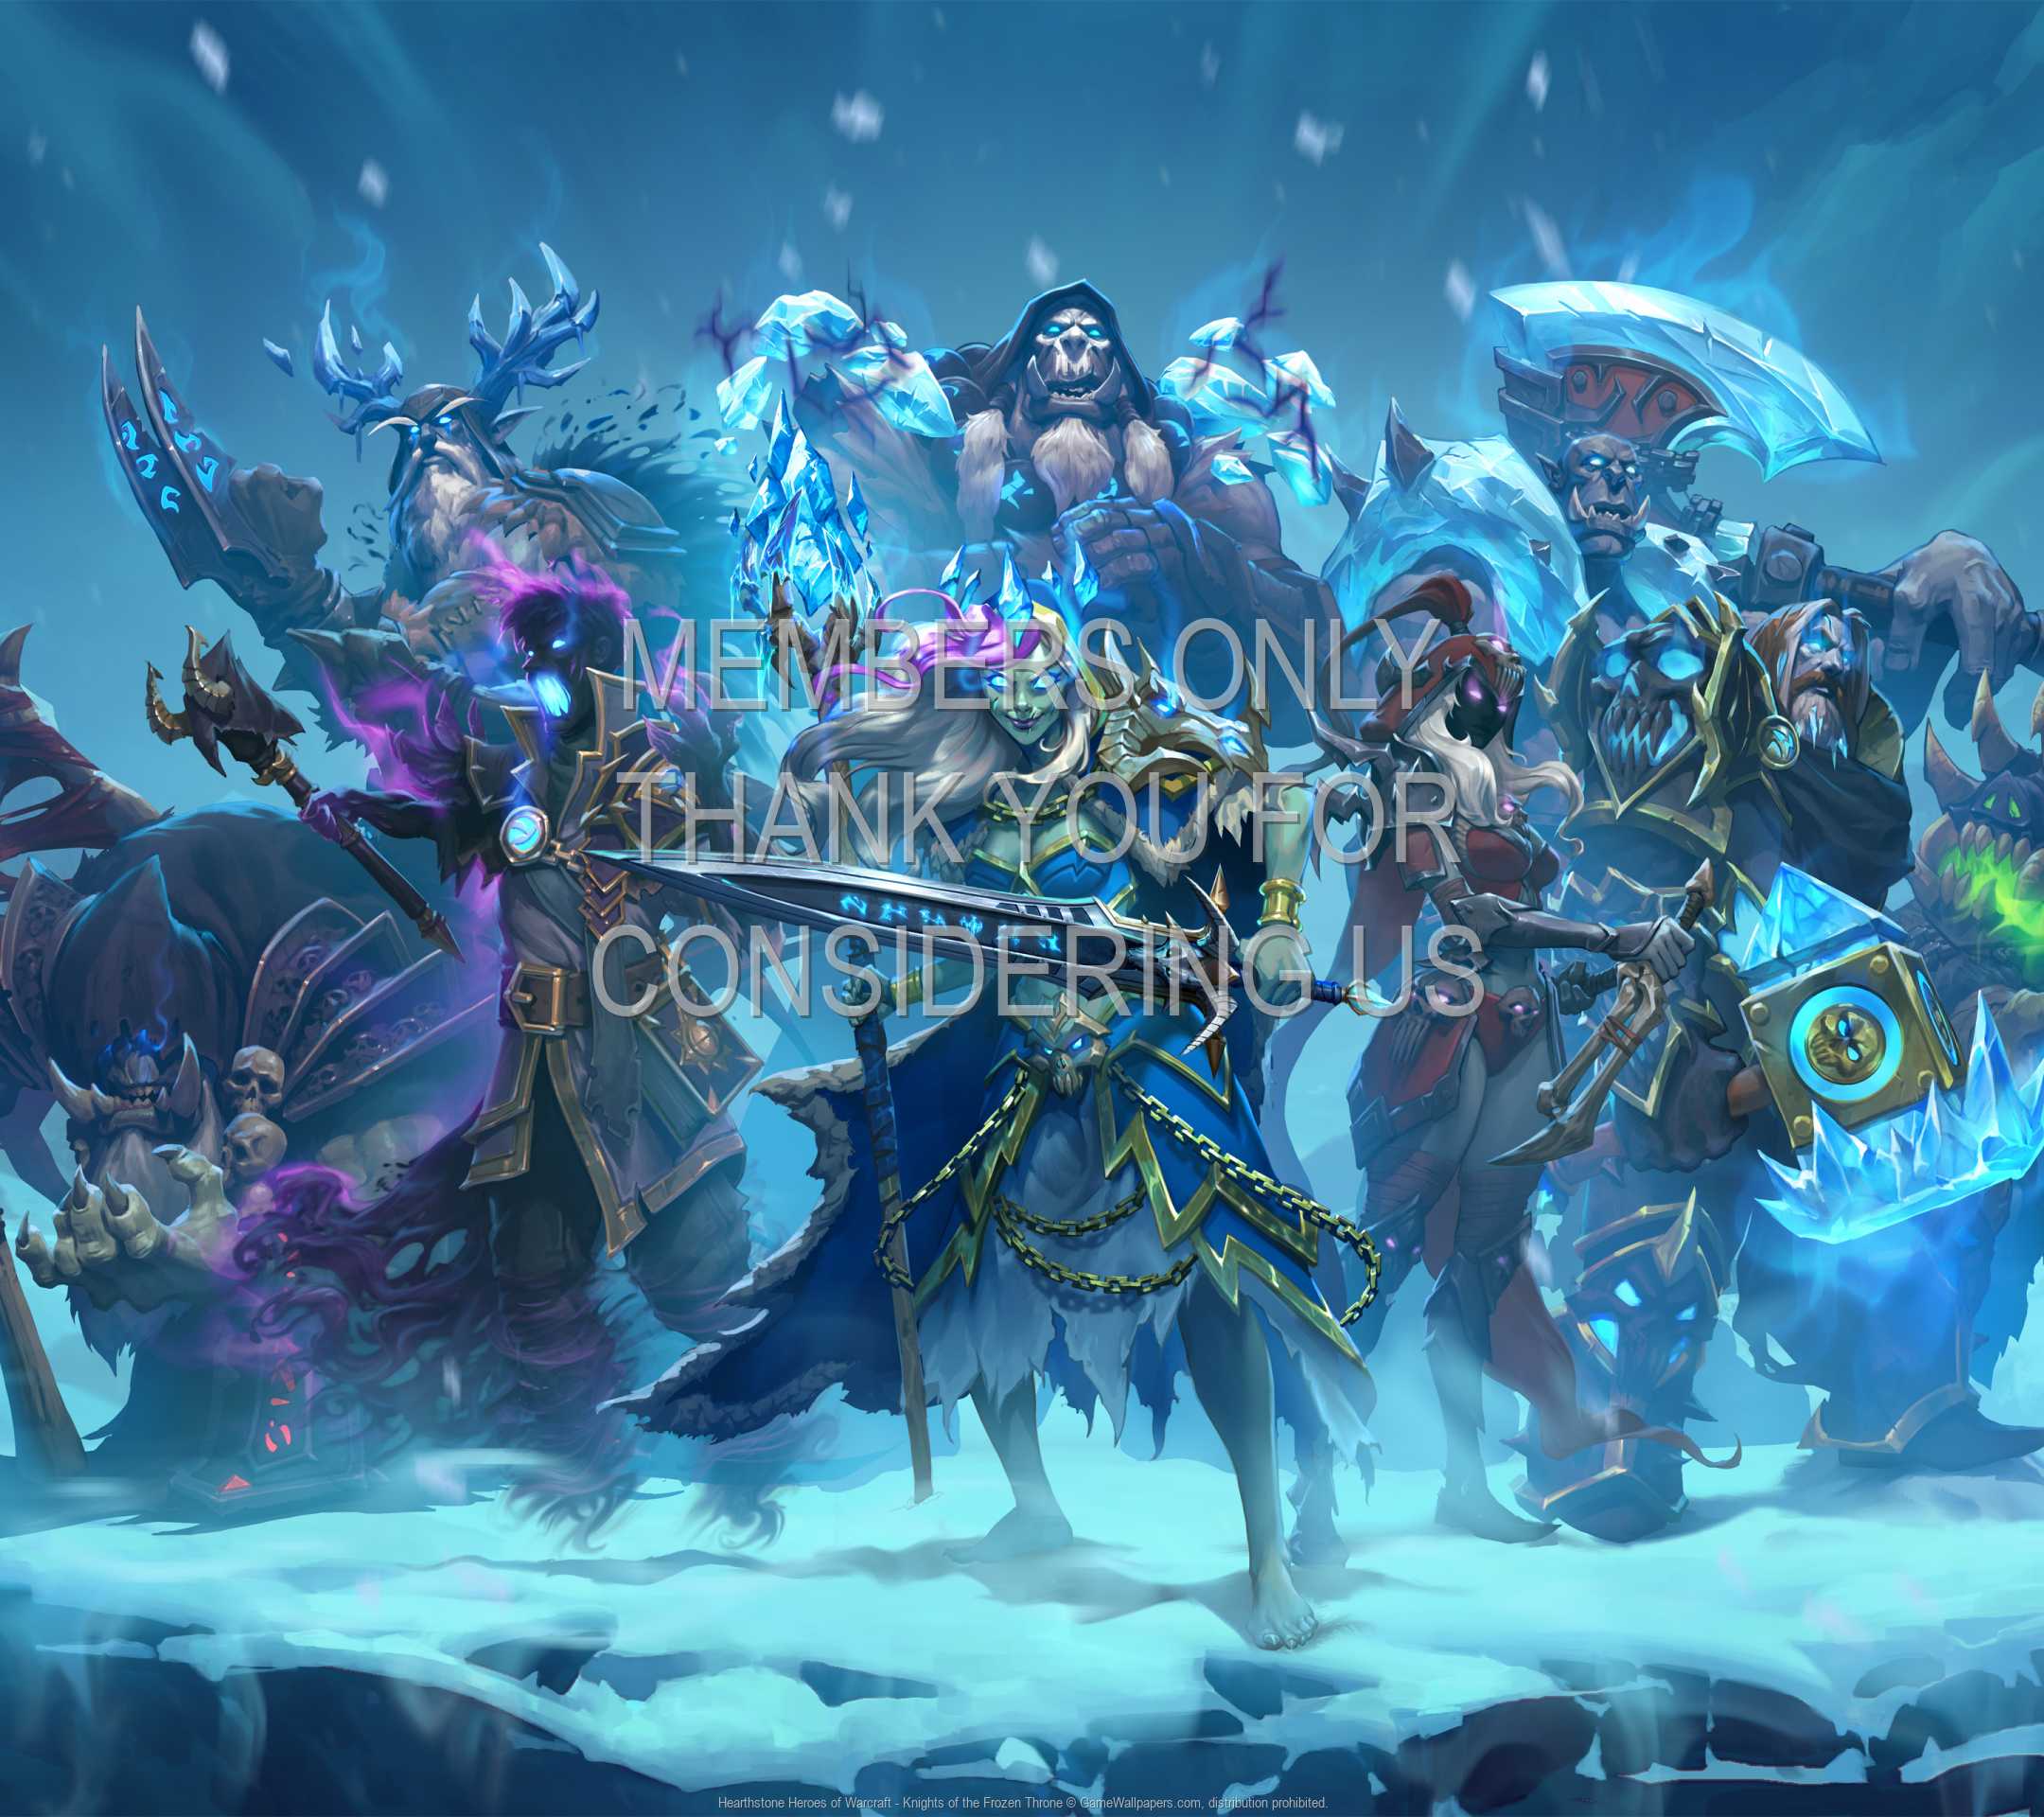 Hearthstone: Heroes of Warcraft - Knights of the Frozen Throne wallpaper 02  1080p Horizontal